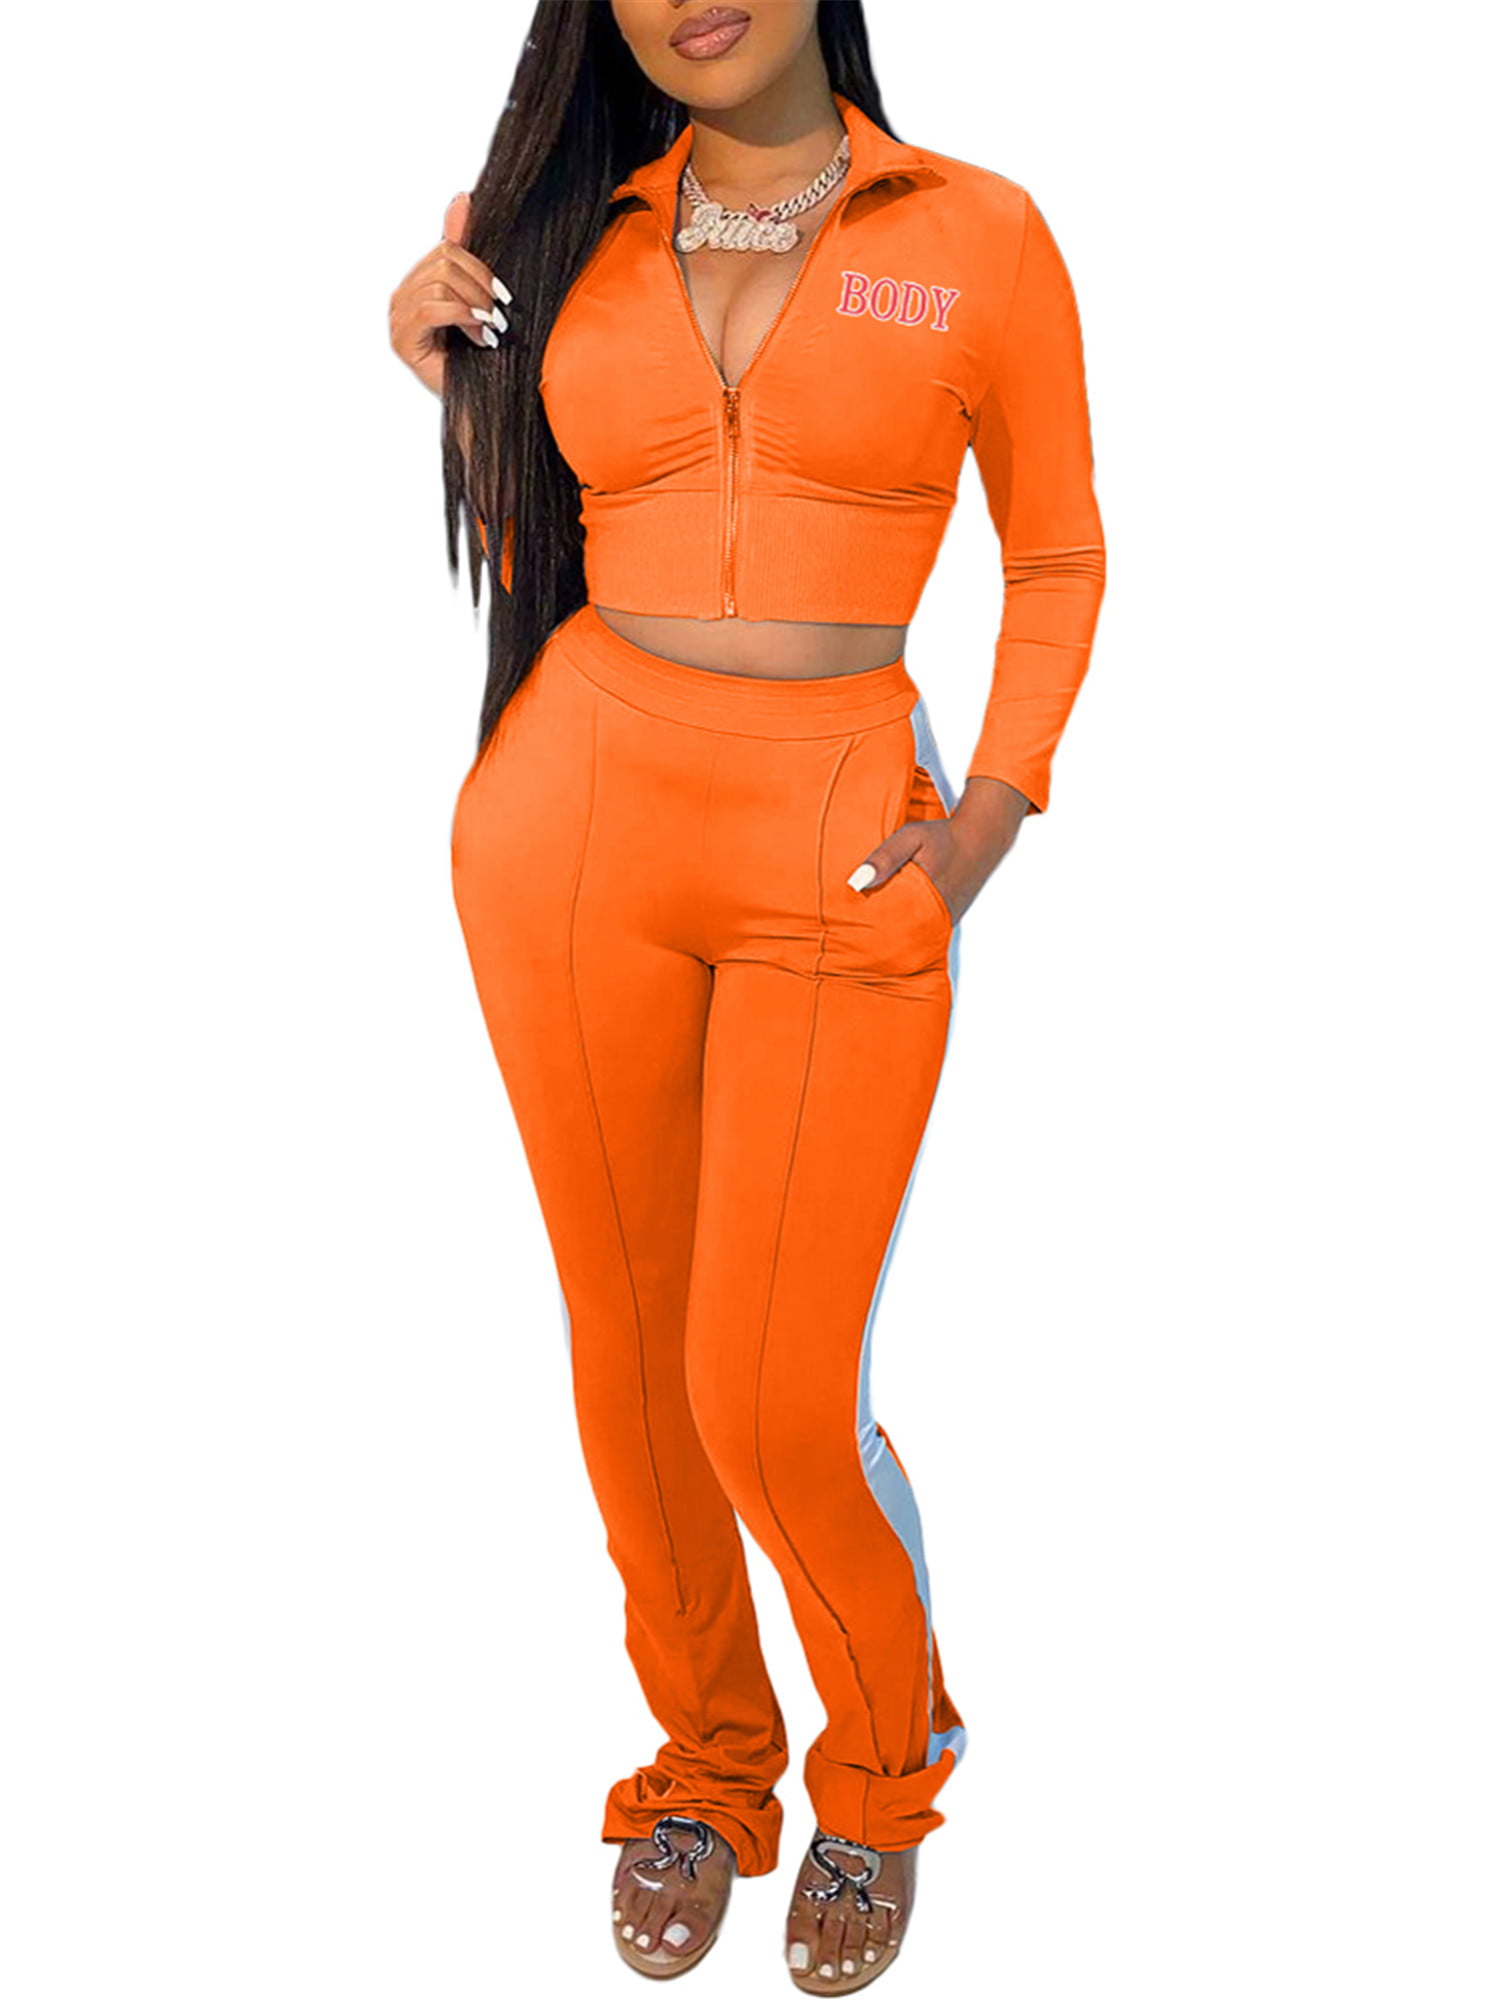 Plus Size 2 Piece Outfits for Women Tracksuit Long Sleeve Tunic Tops Bodycon Long Pants Loungwear Set